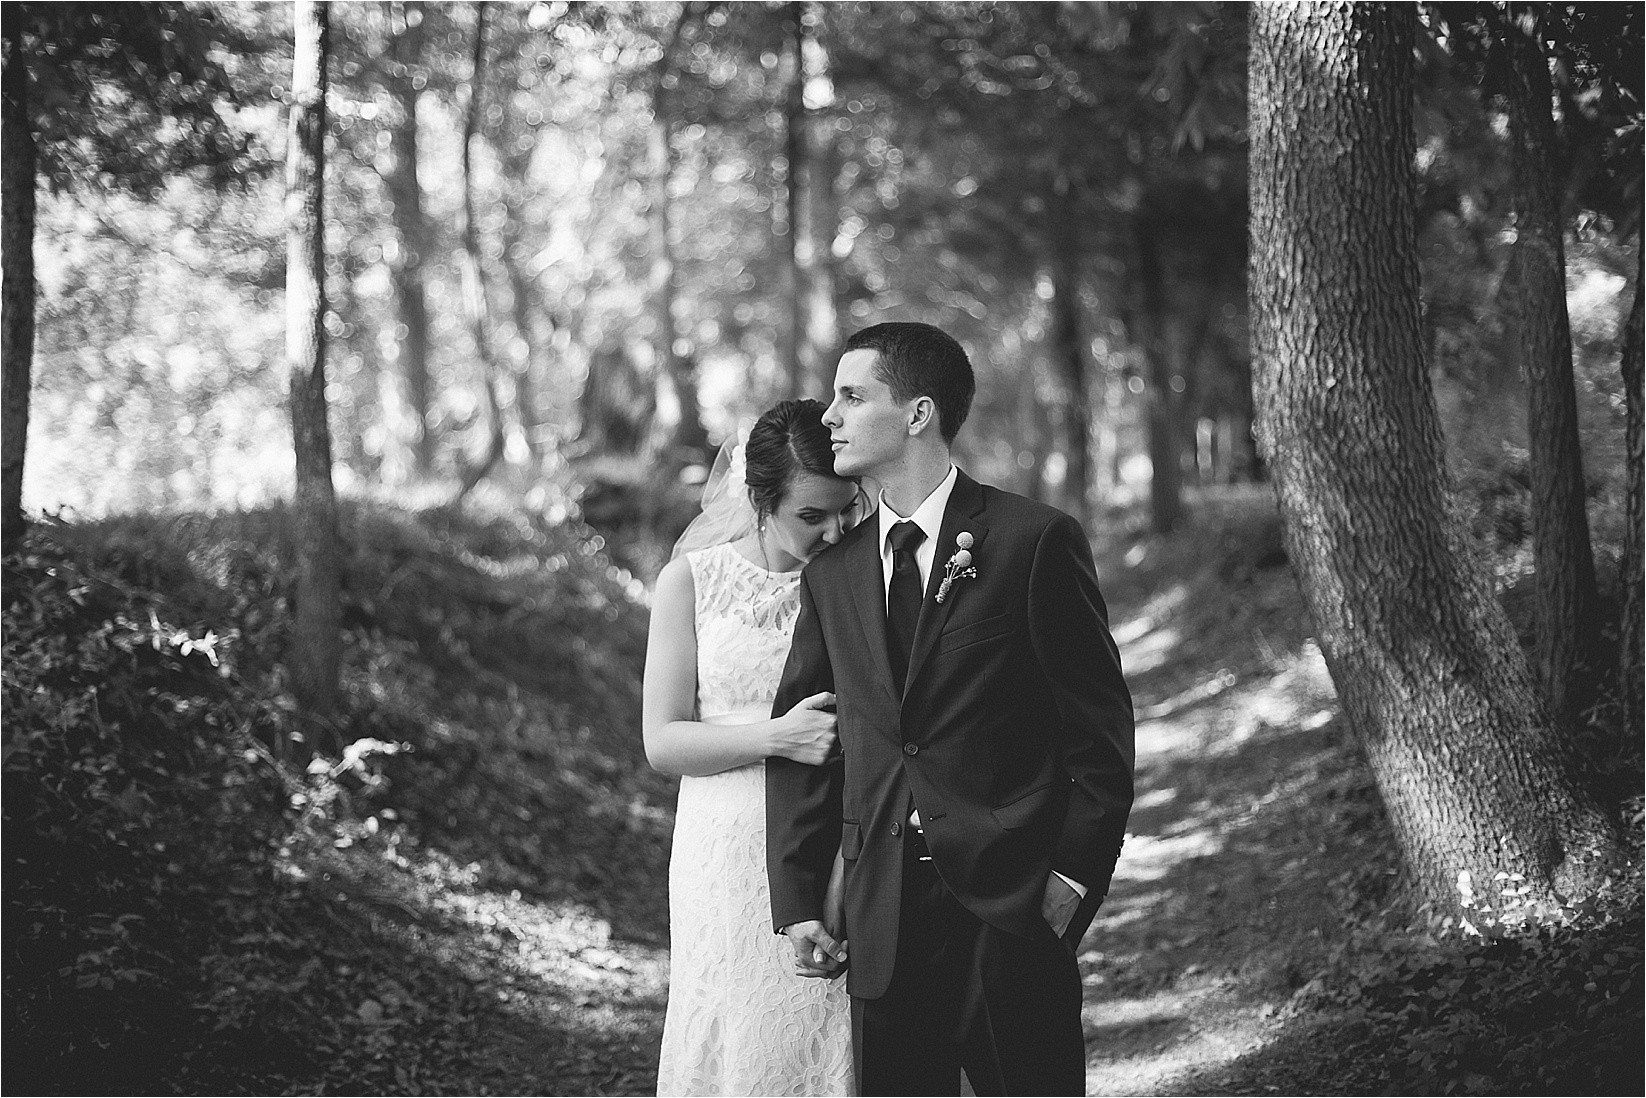 Groom looking off in the distance at Caroline and Evans mountain wedding at yesterday spaces in asheville leicester north carolina